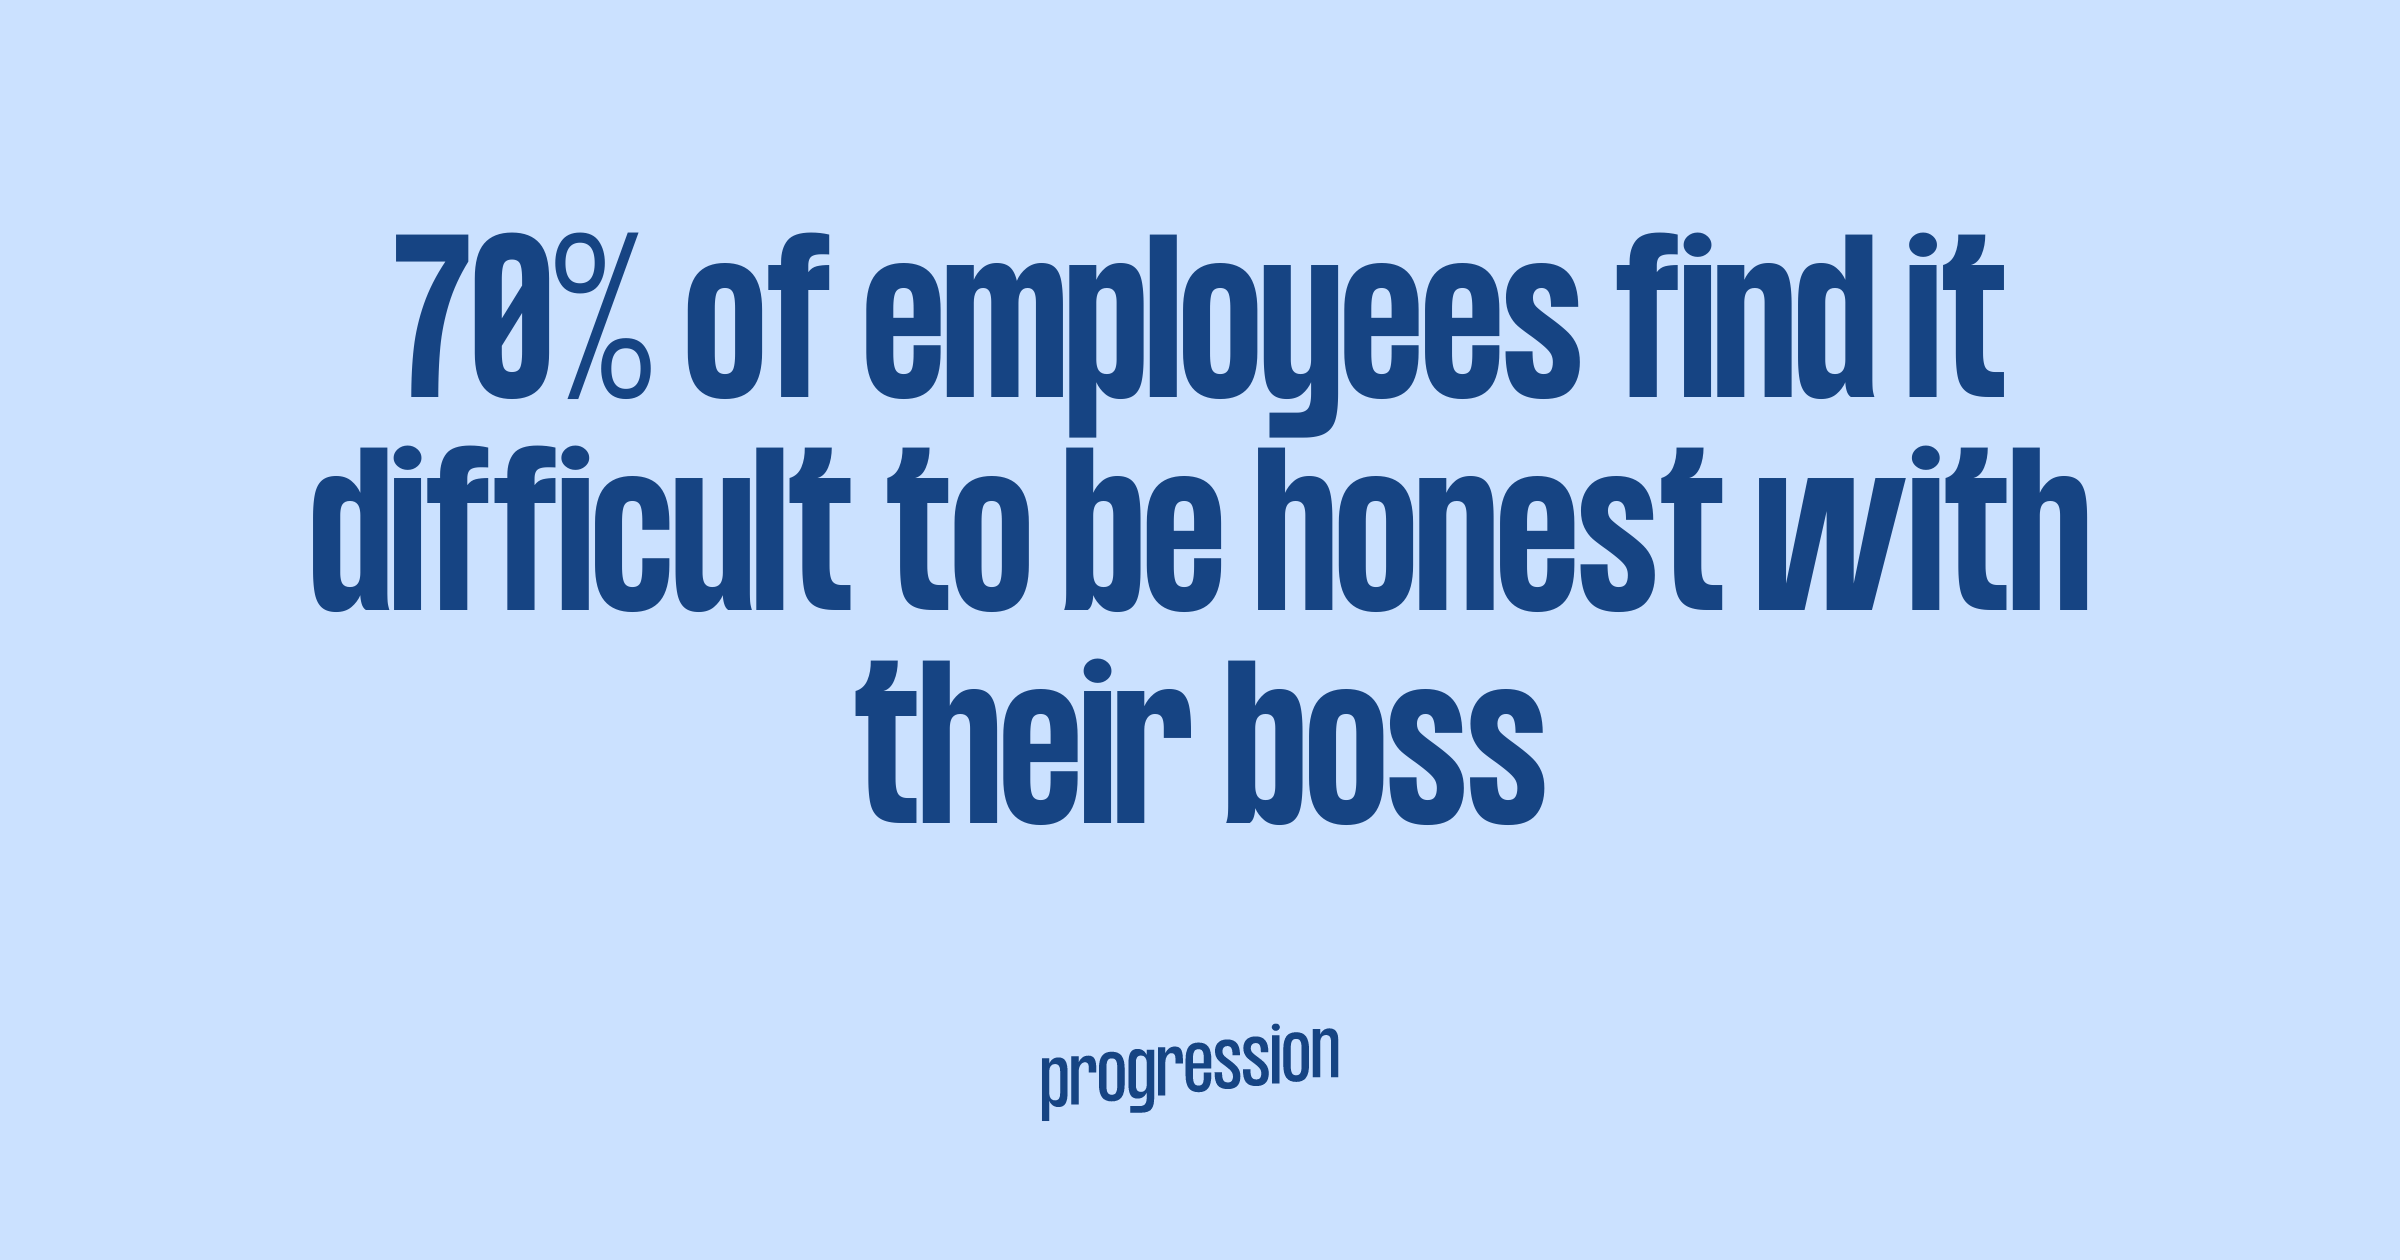 70% of employees find it difficult to be honest with their boss